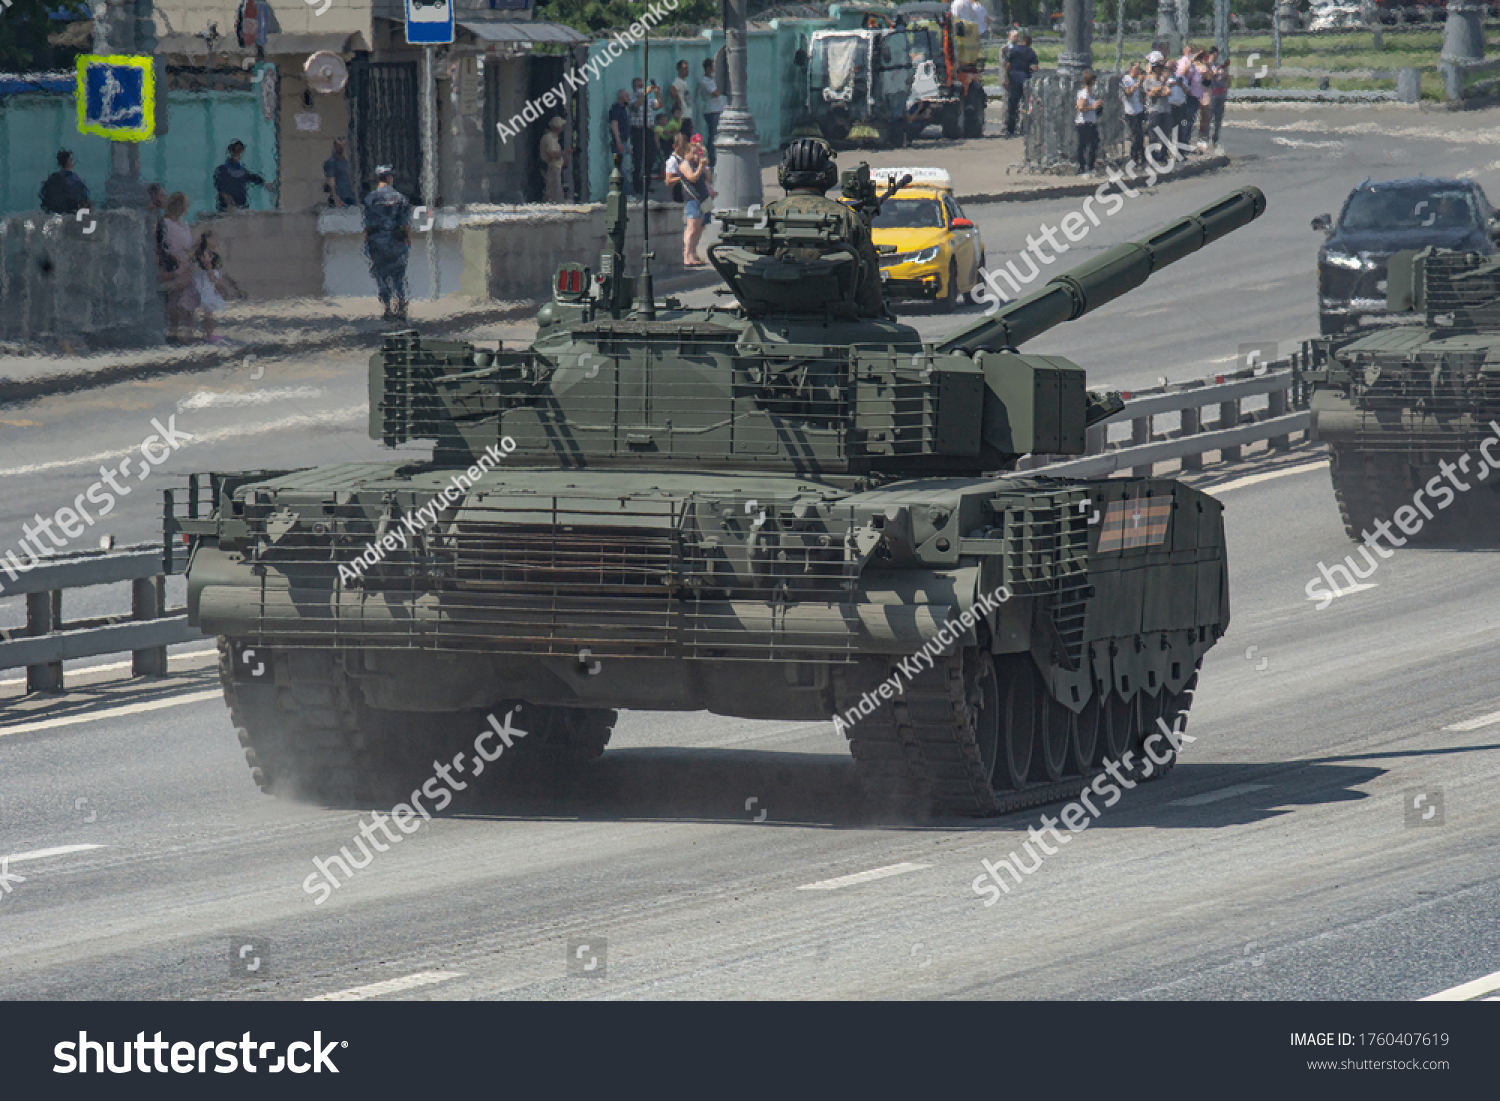 https://image.shutterstock.com/z/stock-photo-june-moscow-russia-the-the-t-bvm-tank-returns-after-participating-in-the-rehearsal-of-1760407619.jpg